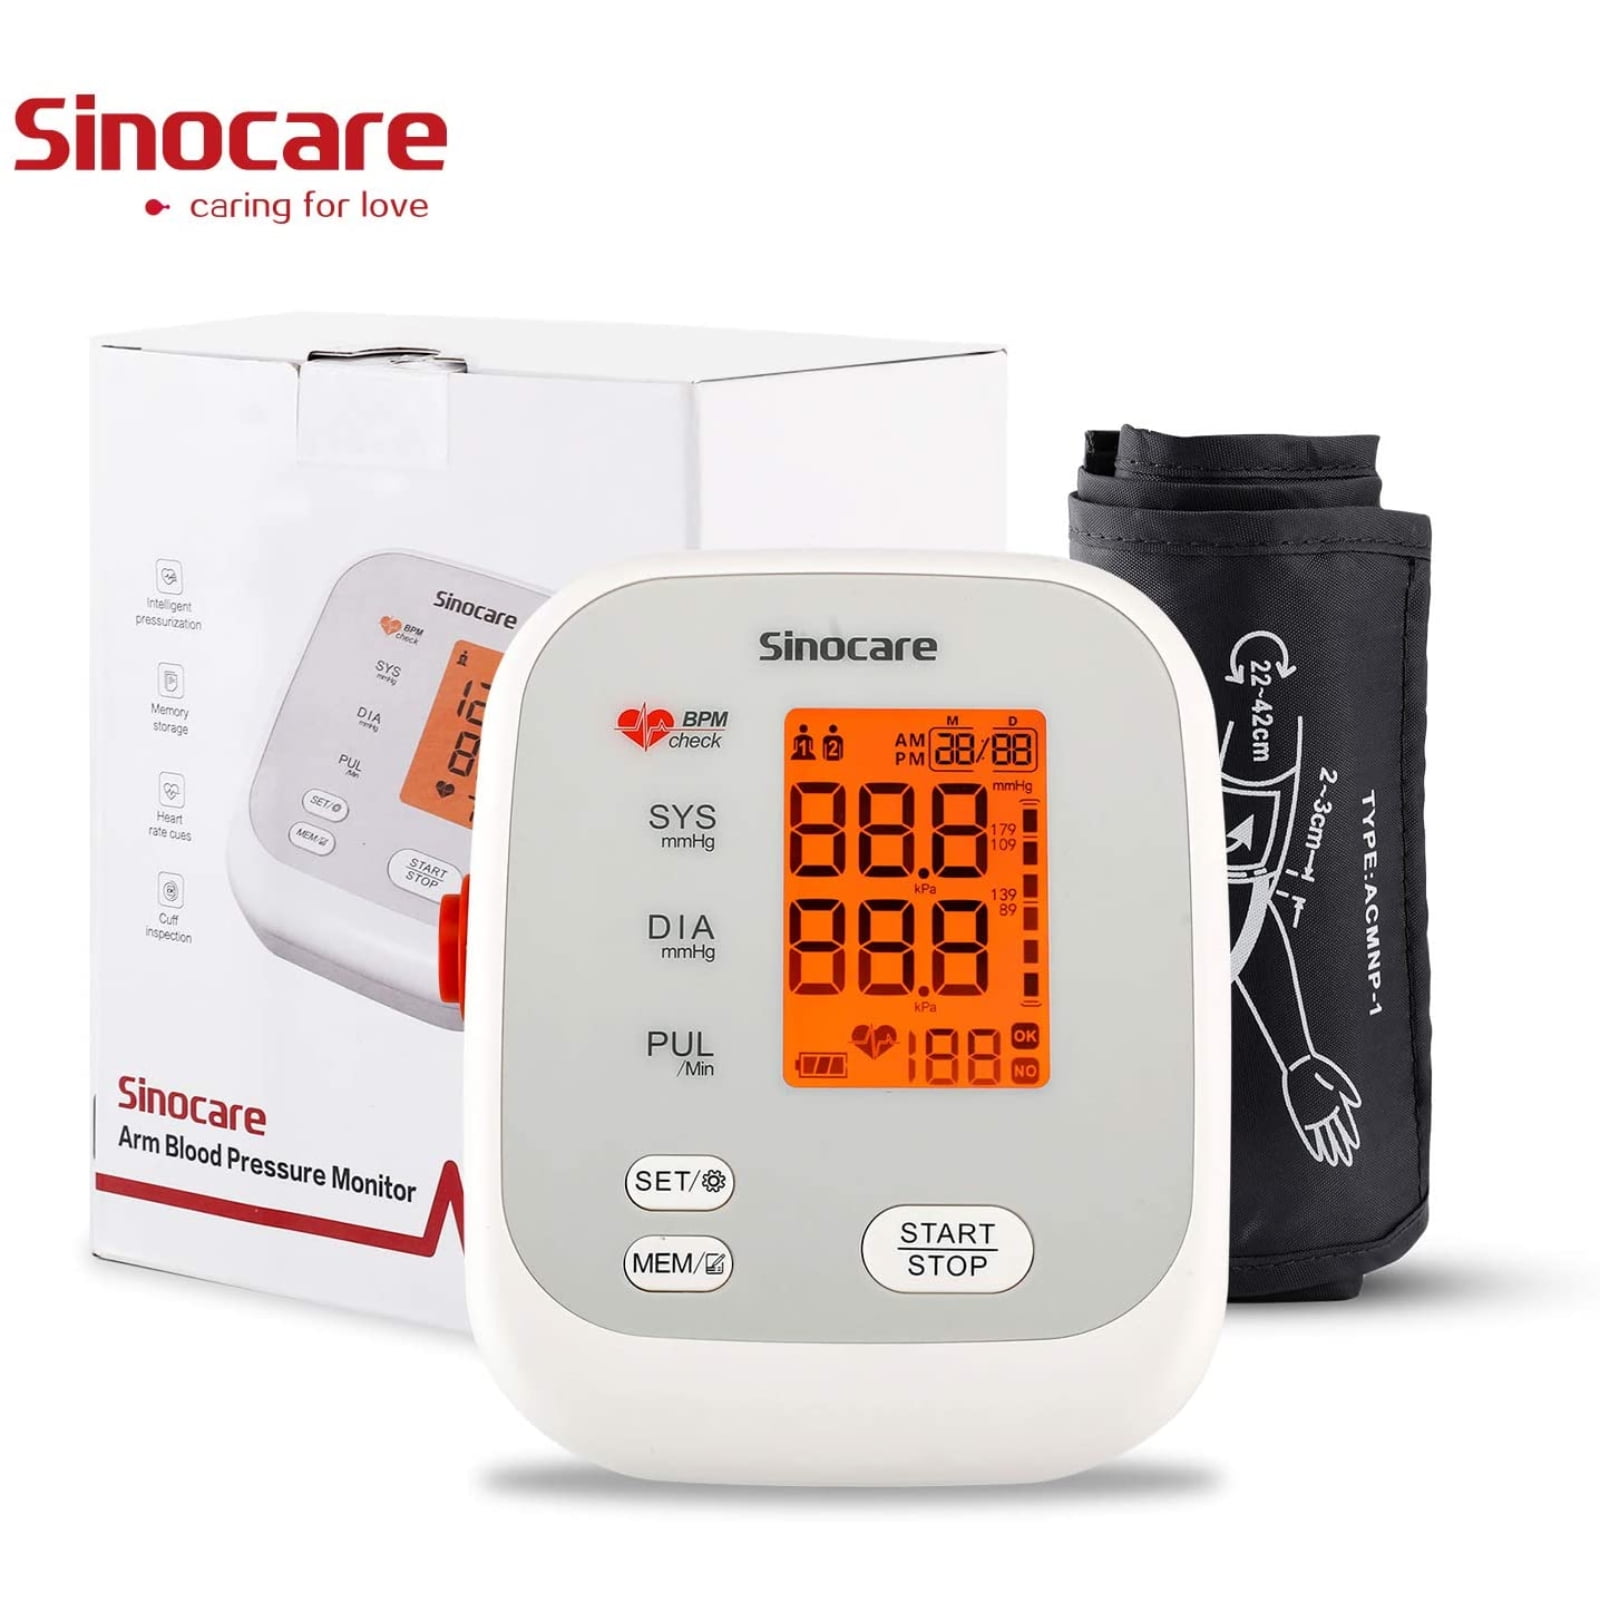  Blood Pressure Monitor Upper Arm, Smilecare Automatic Arm Blood  Pressure Monitors，Accurate BP & Pulse Rate Monitoring Meter with Adjustable  Wide Cuff 22-42cm, Middle Size Warm Backlit Display : Health & Household